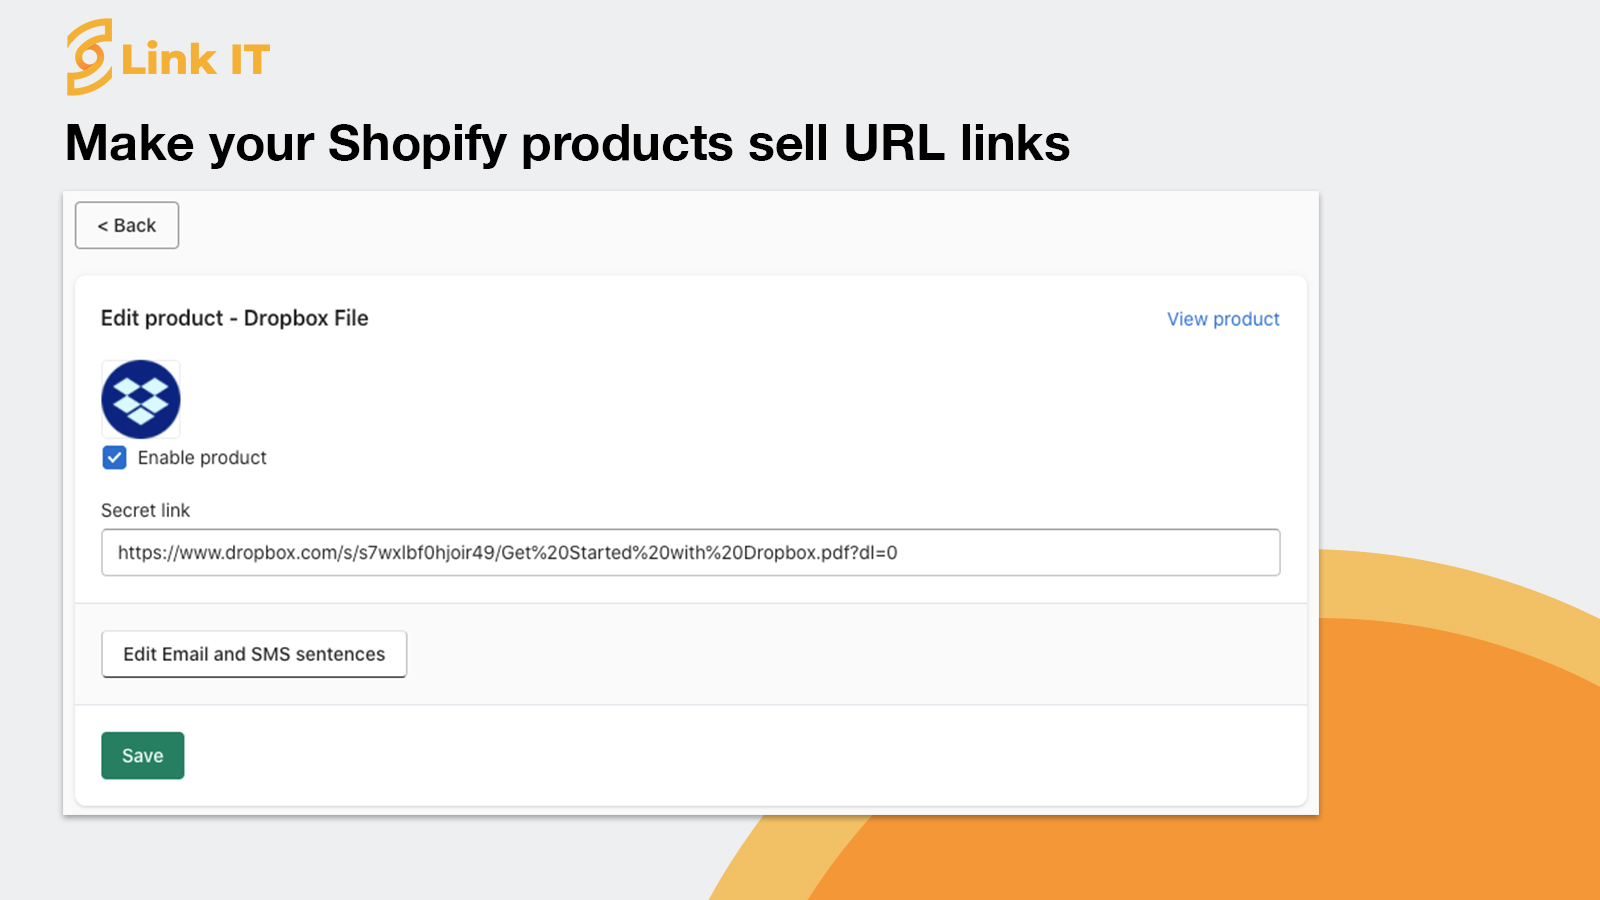 Make your Shopify products sell URL links